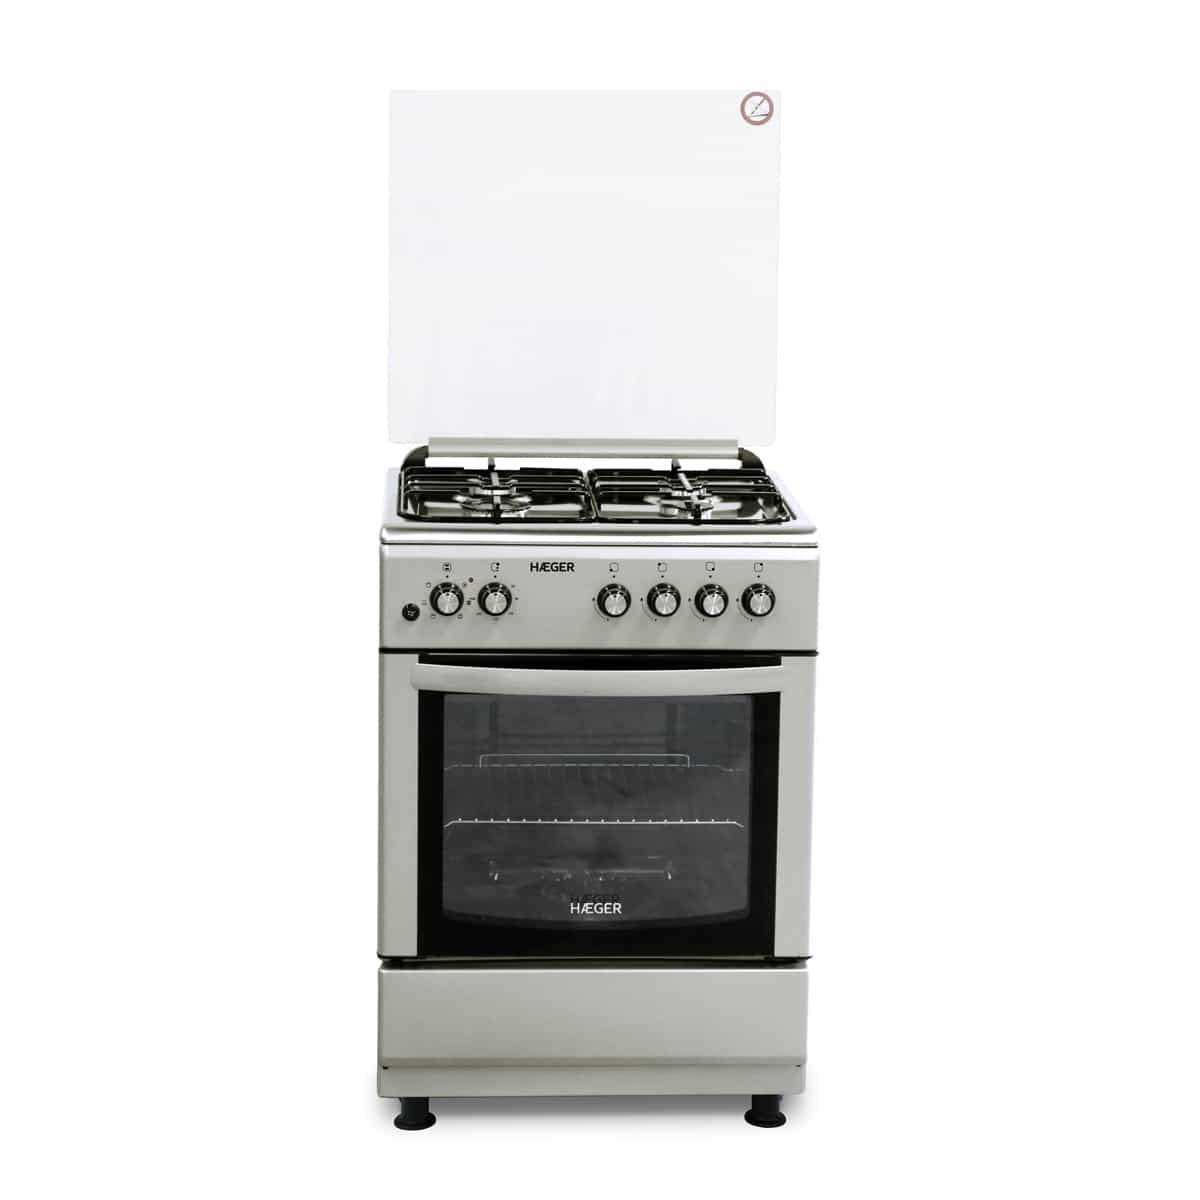 Gas Cooker and Electric Stove HAEGER - 60x60 (S.S/Gray)IGN/GRILL - HAEGER  Home Appliances